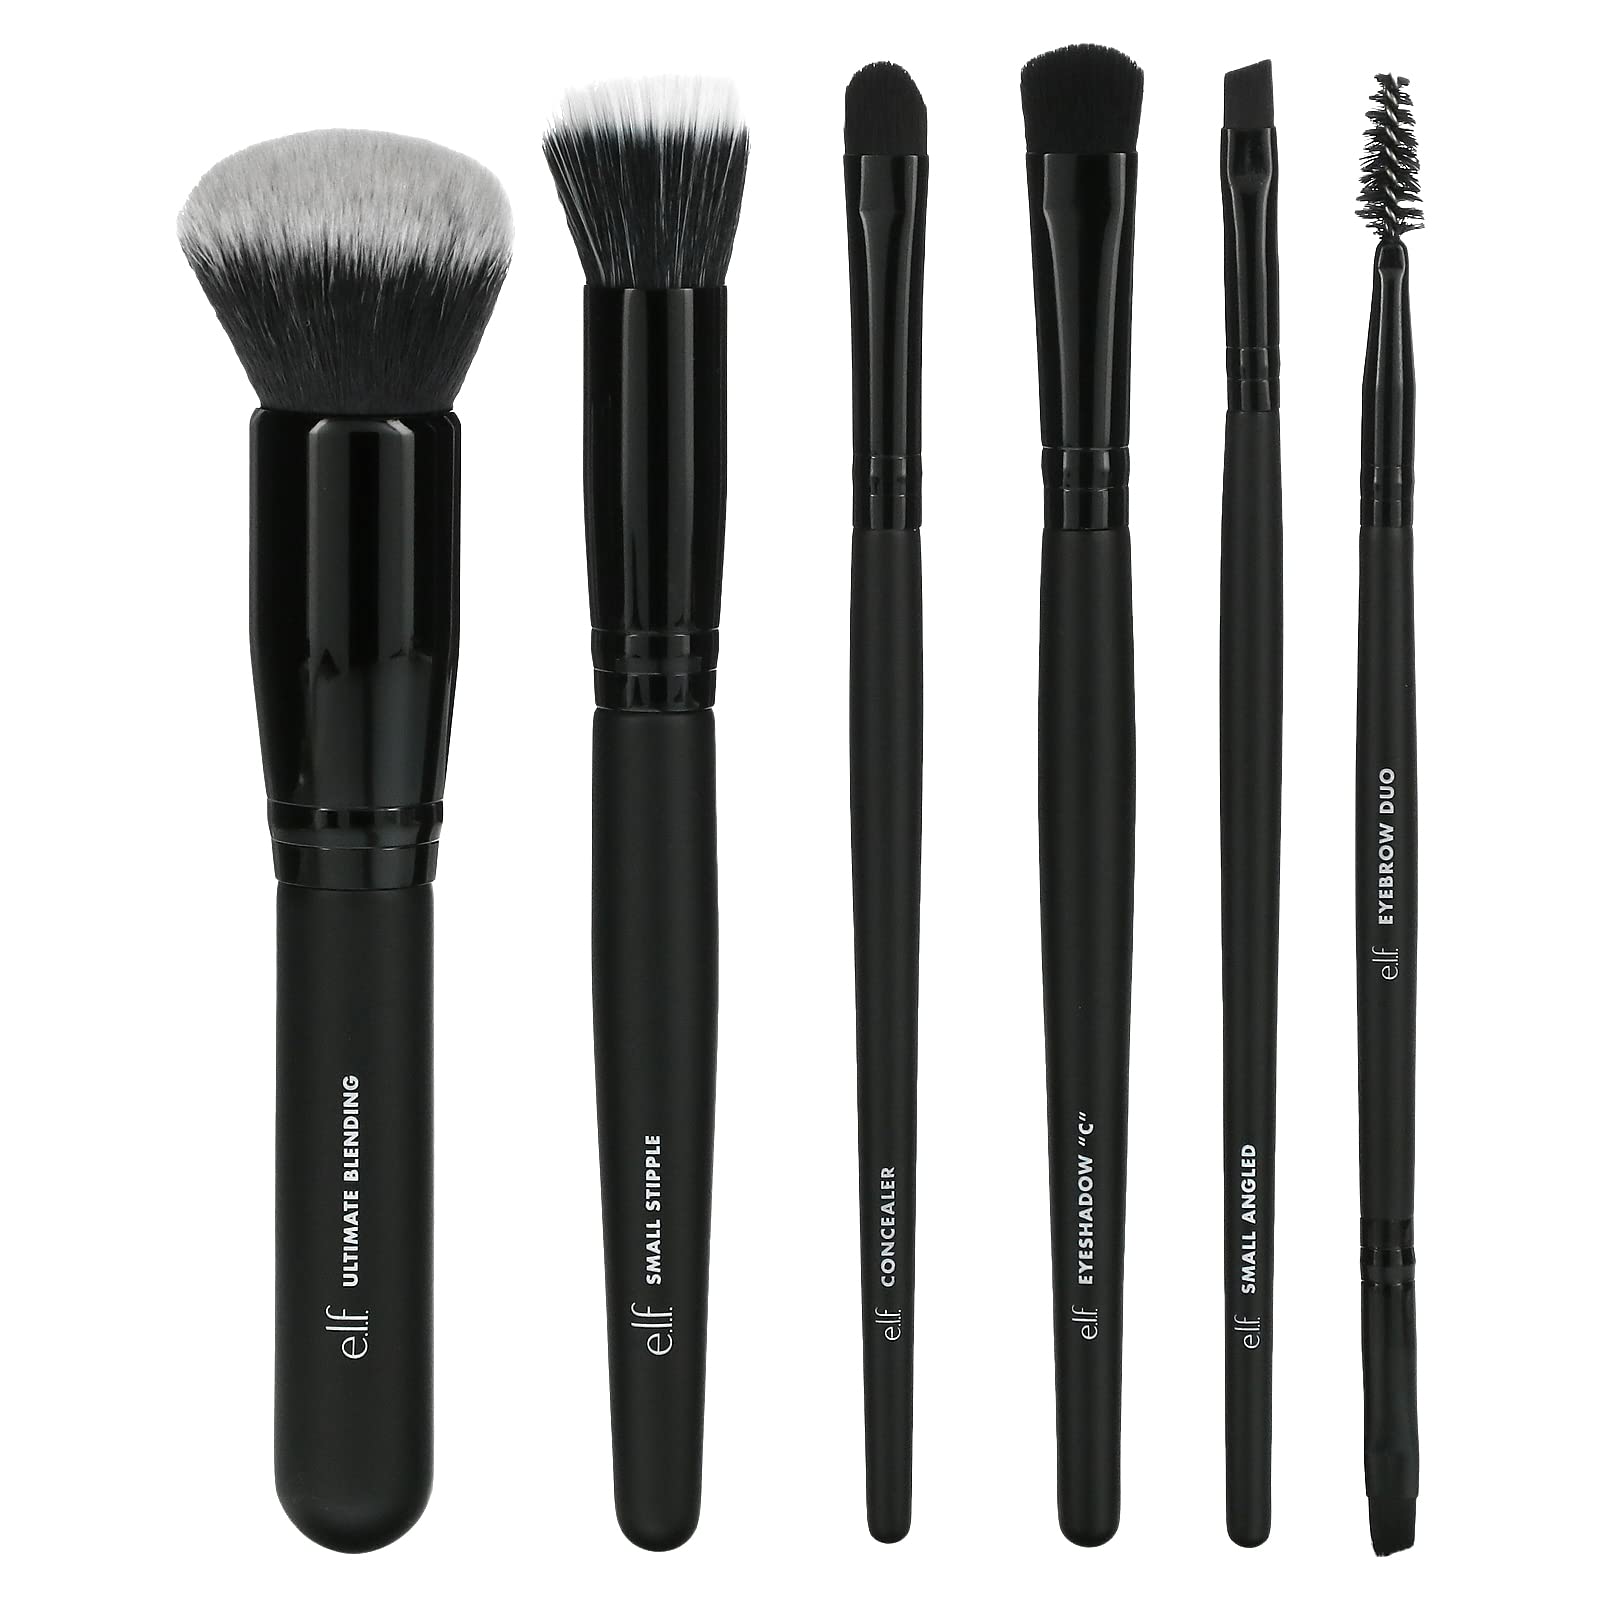 e.l.f. Flawless Face Brush Collection, 6 pc - Kroger